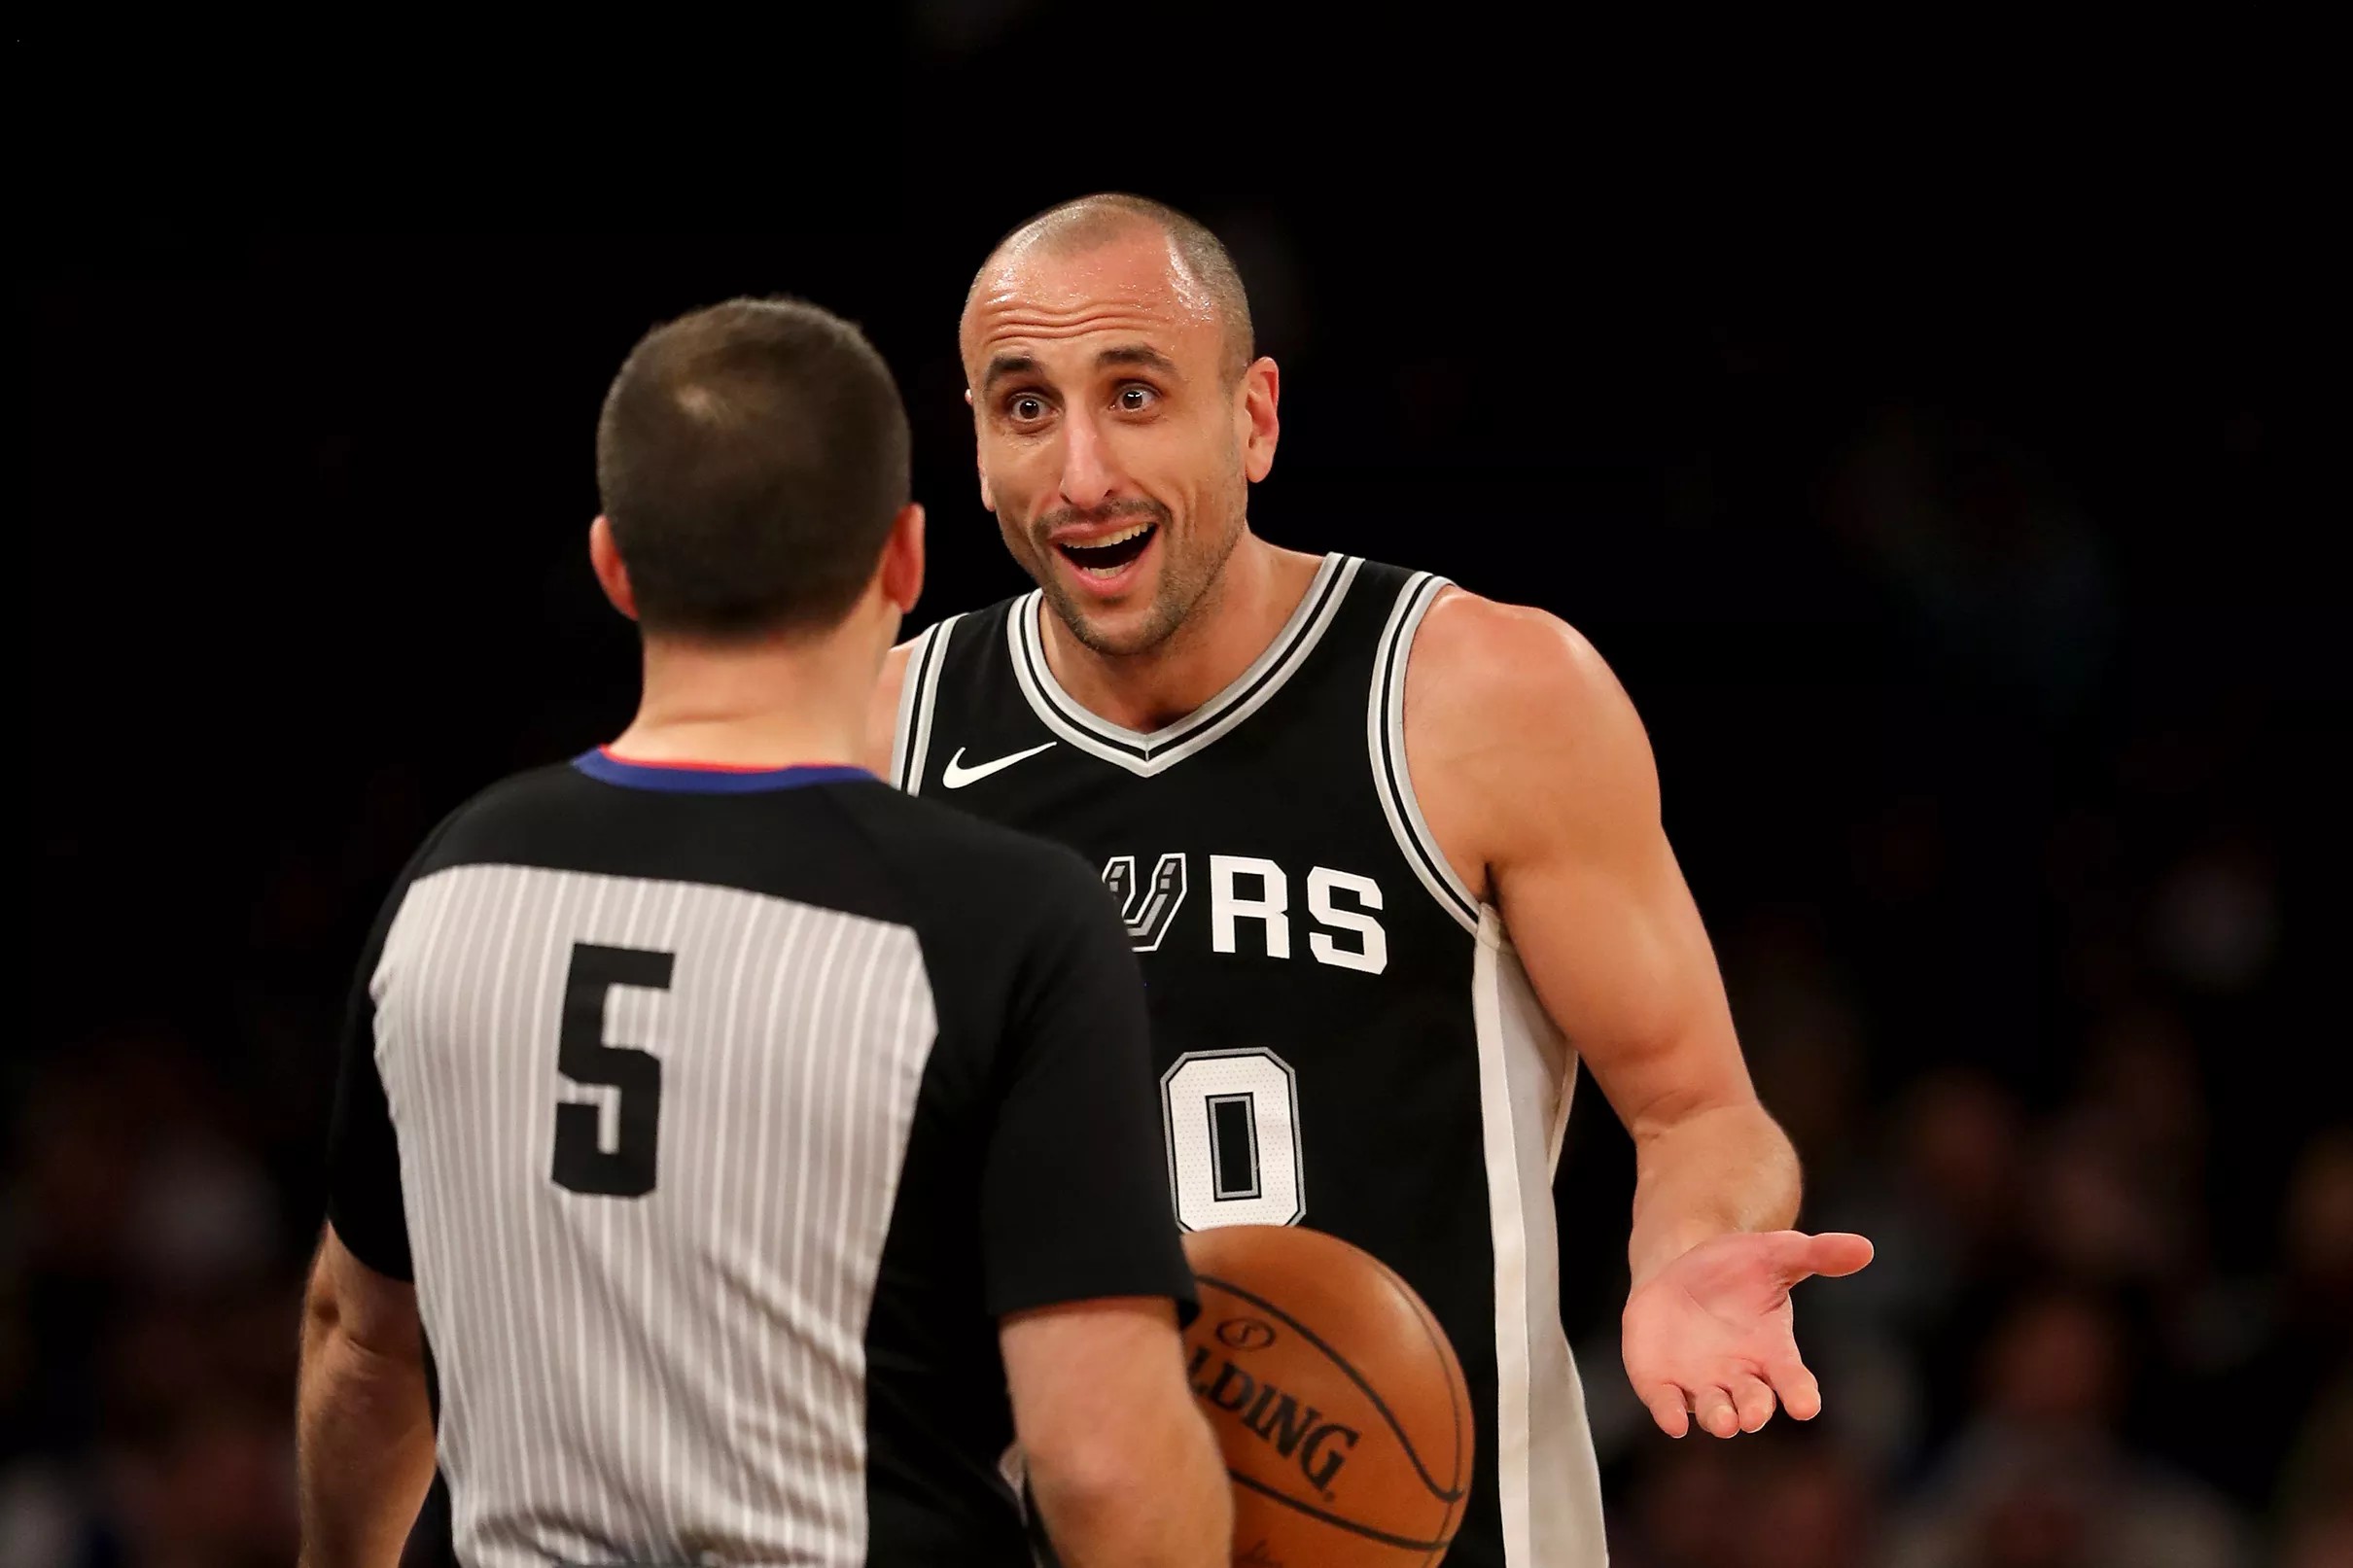 For a retired guy, Manu Ginobili is spending a fair amount of time with